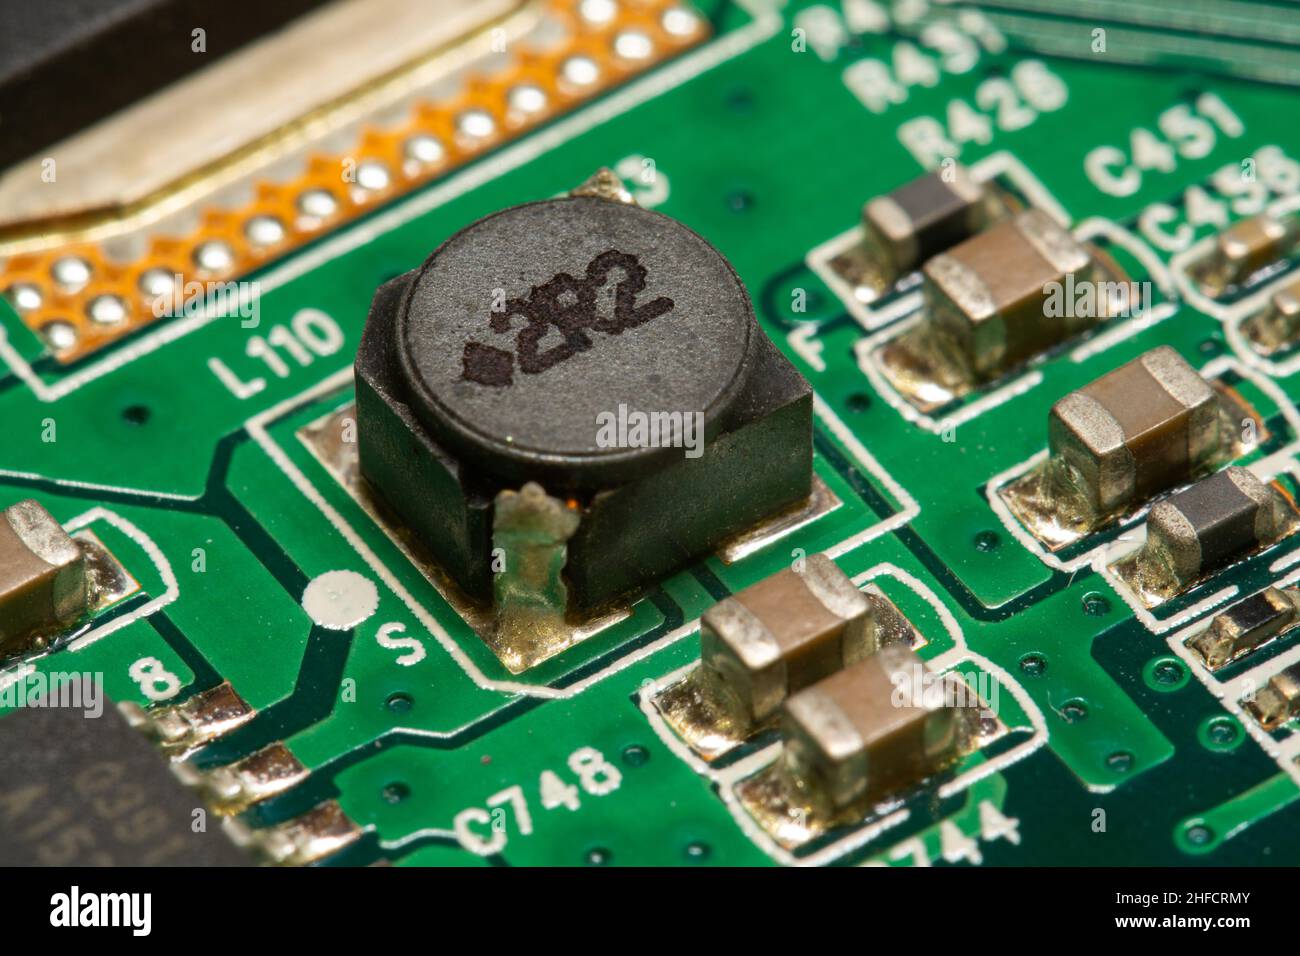 SMD inductor and other electronic components soldered on a green printed circuit board (PCB). Stock Photo